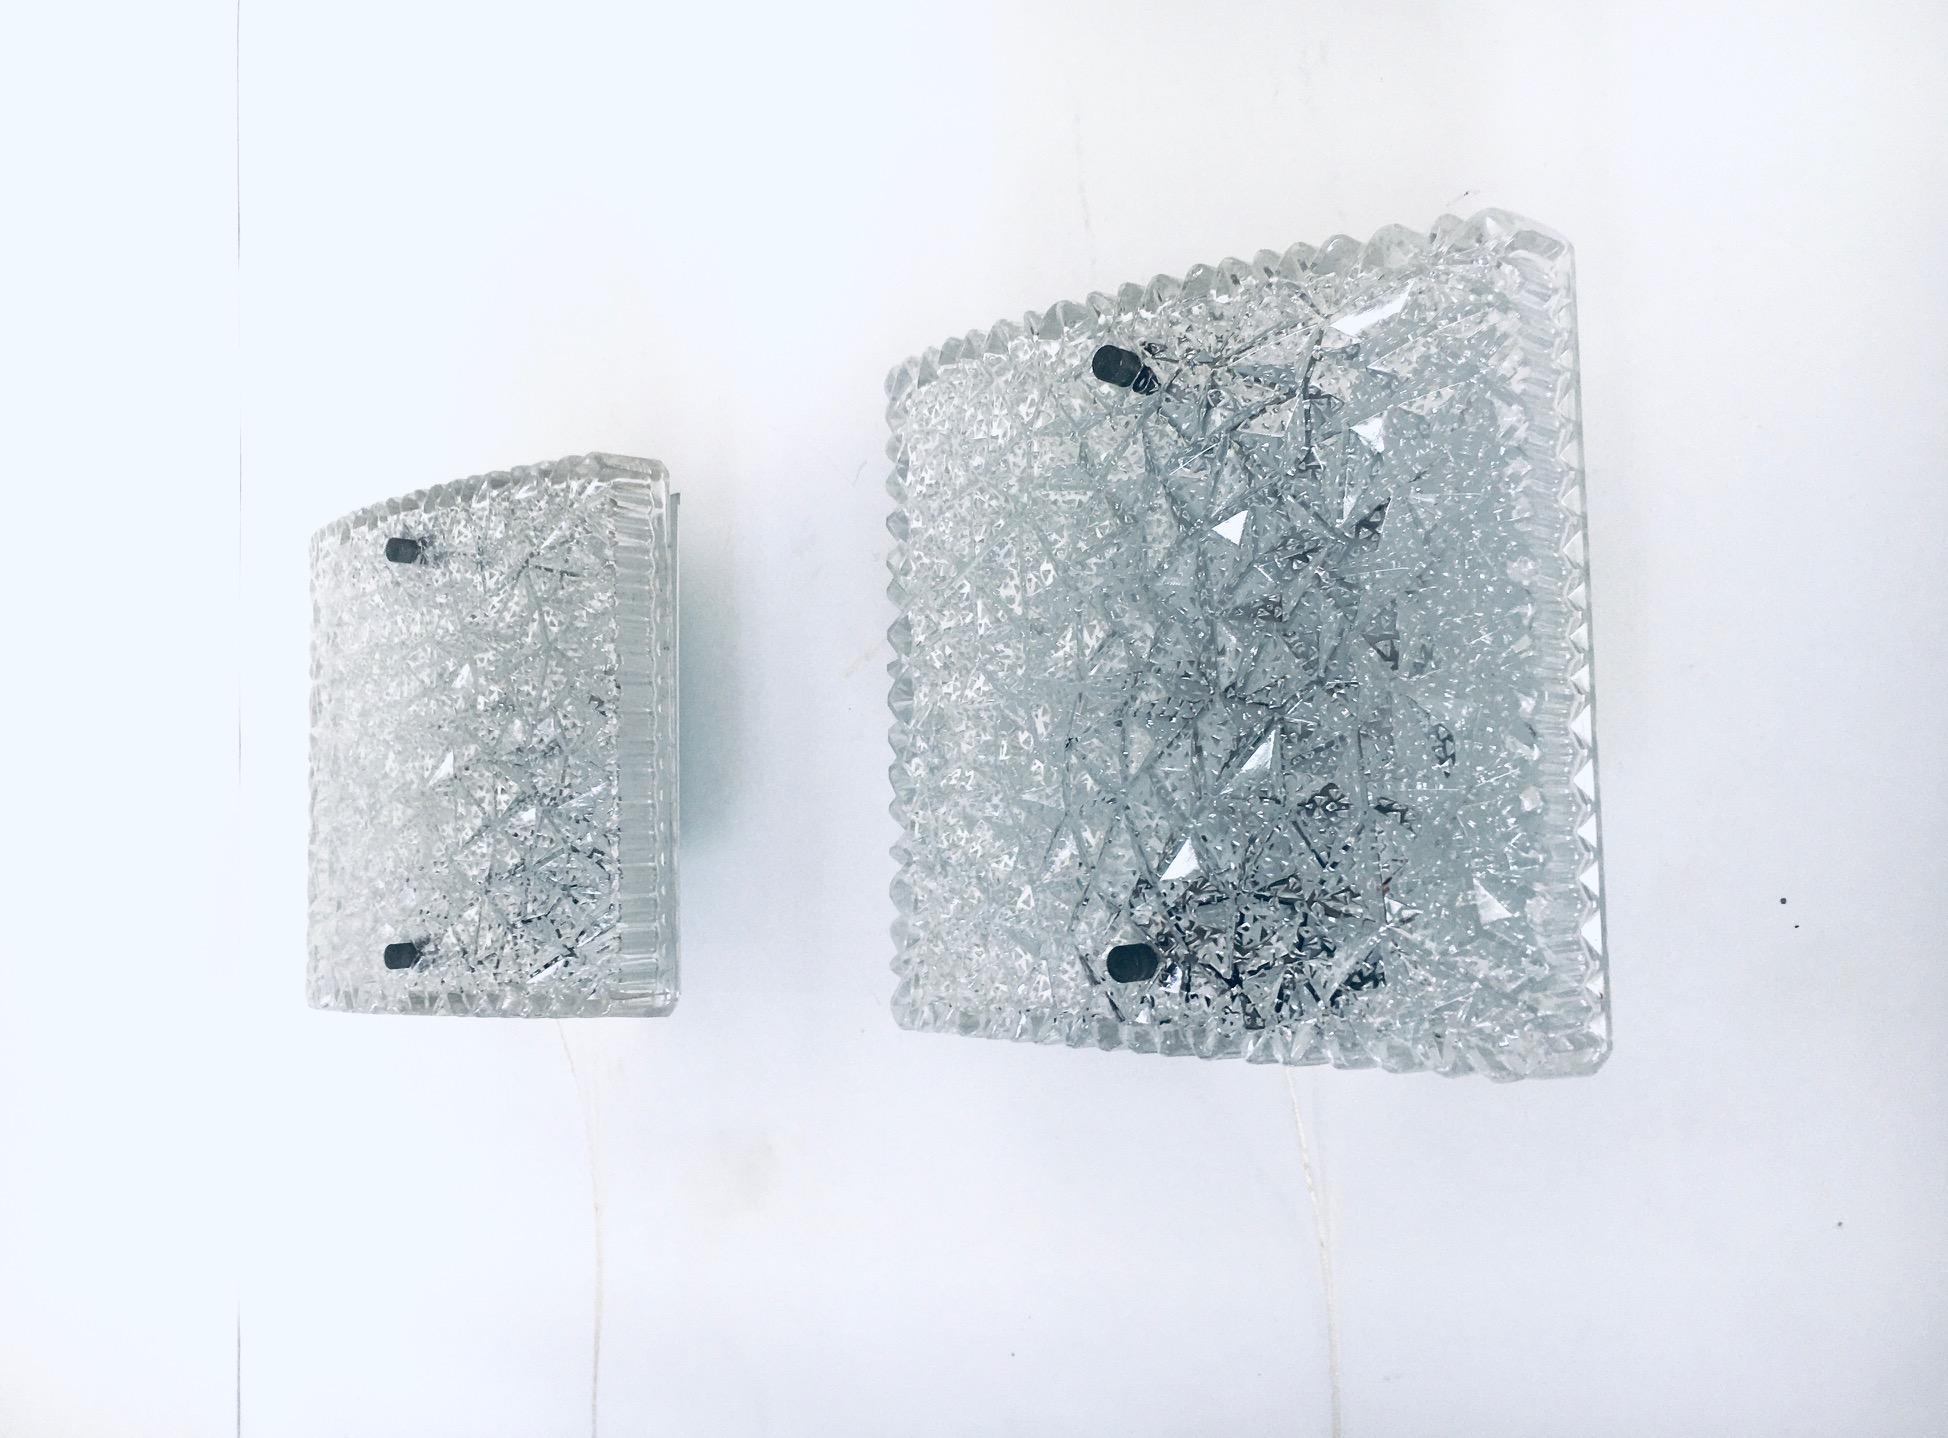 Vintage Mid-Century Modern design glass sconce wall lamp set of 2 by BUR Leuchten. Made in West Germany, 1960's / 70's. Raised square ice structured pressed glass on metal and plastic base with pull cord mechanism. In very good condition. Each lamp